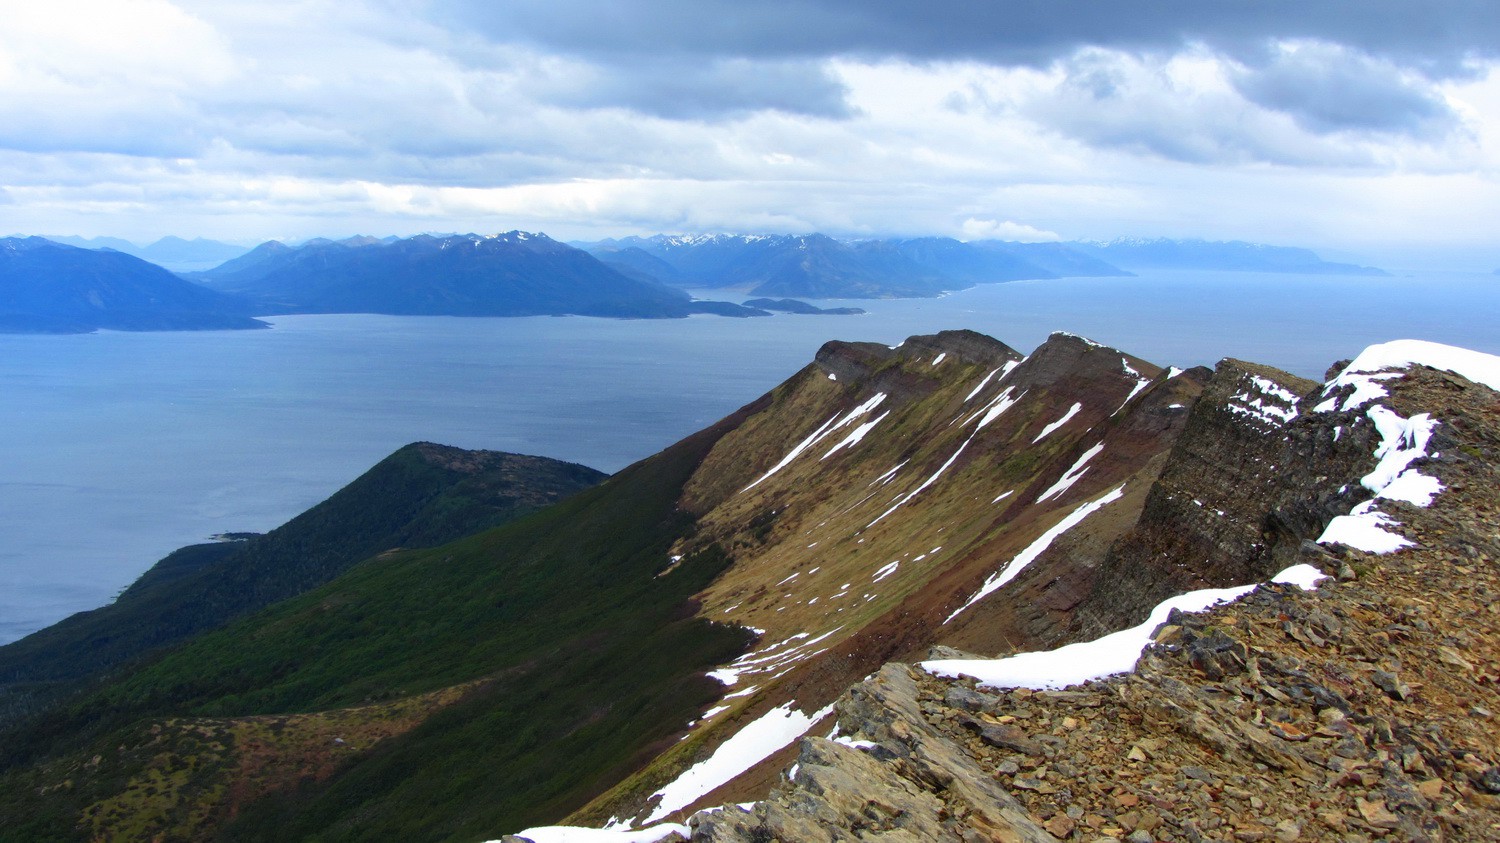 View to South with the Strait of Magellan